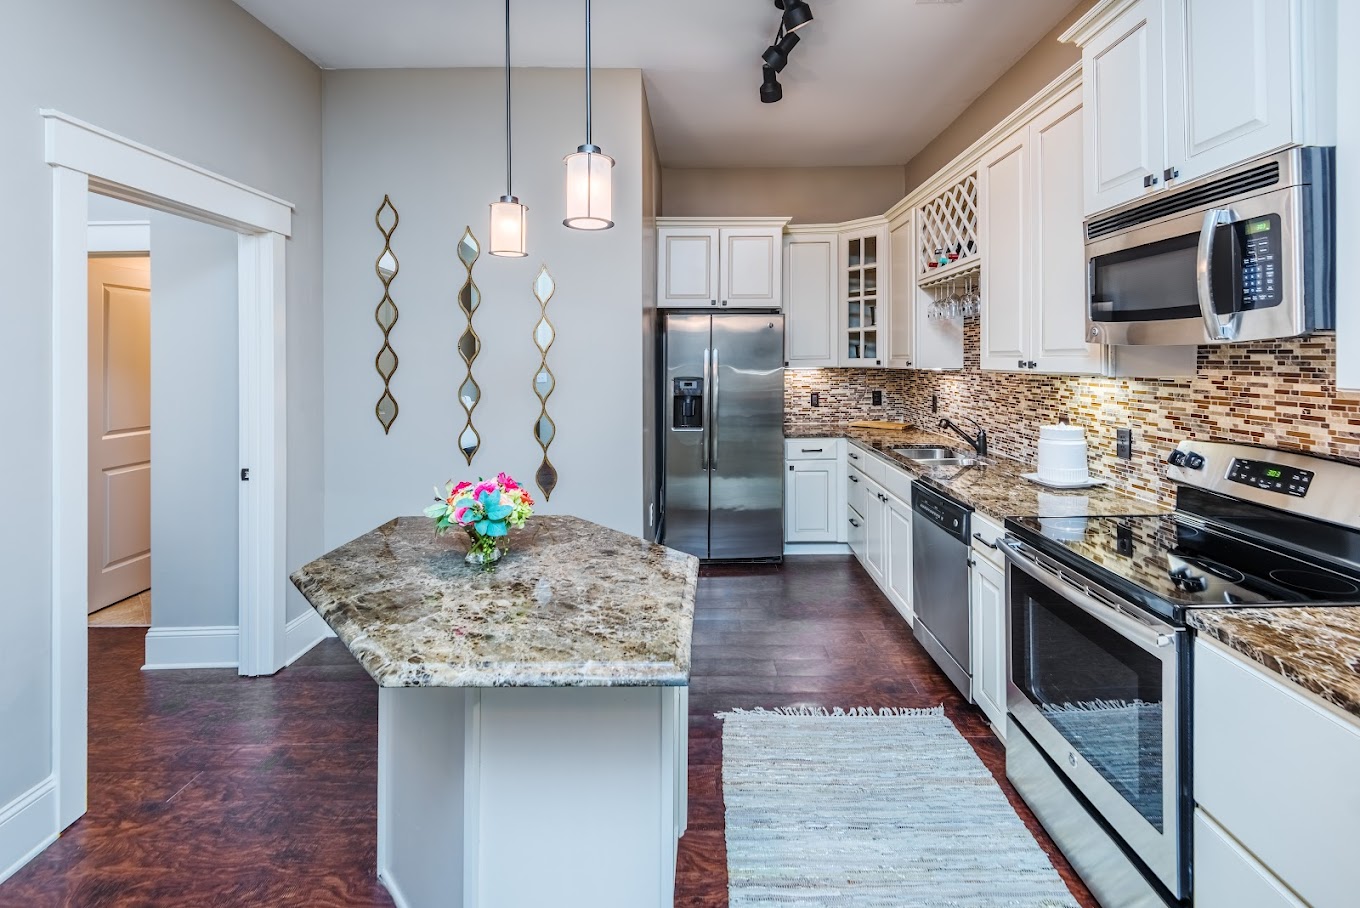 Luxury Plank Flooring, Marble Countertops, Large Islands, Custom Cabinetry, Oil Rubbed Bronze Finishes, Stainless Steel Appliances, Kitchen Pantries